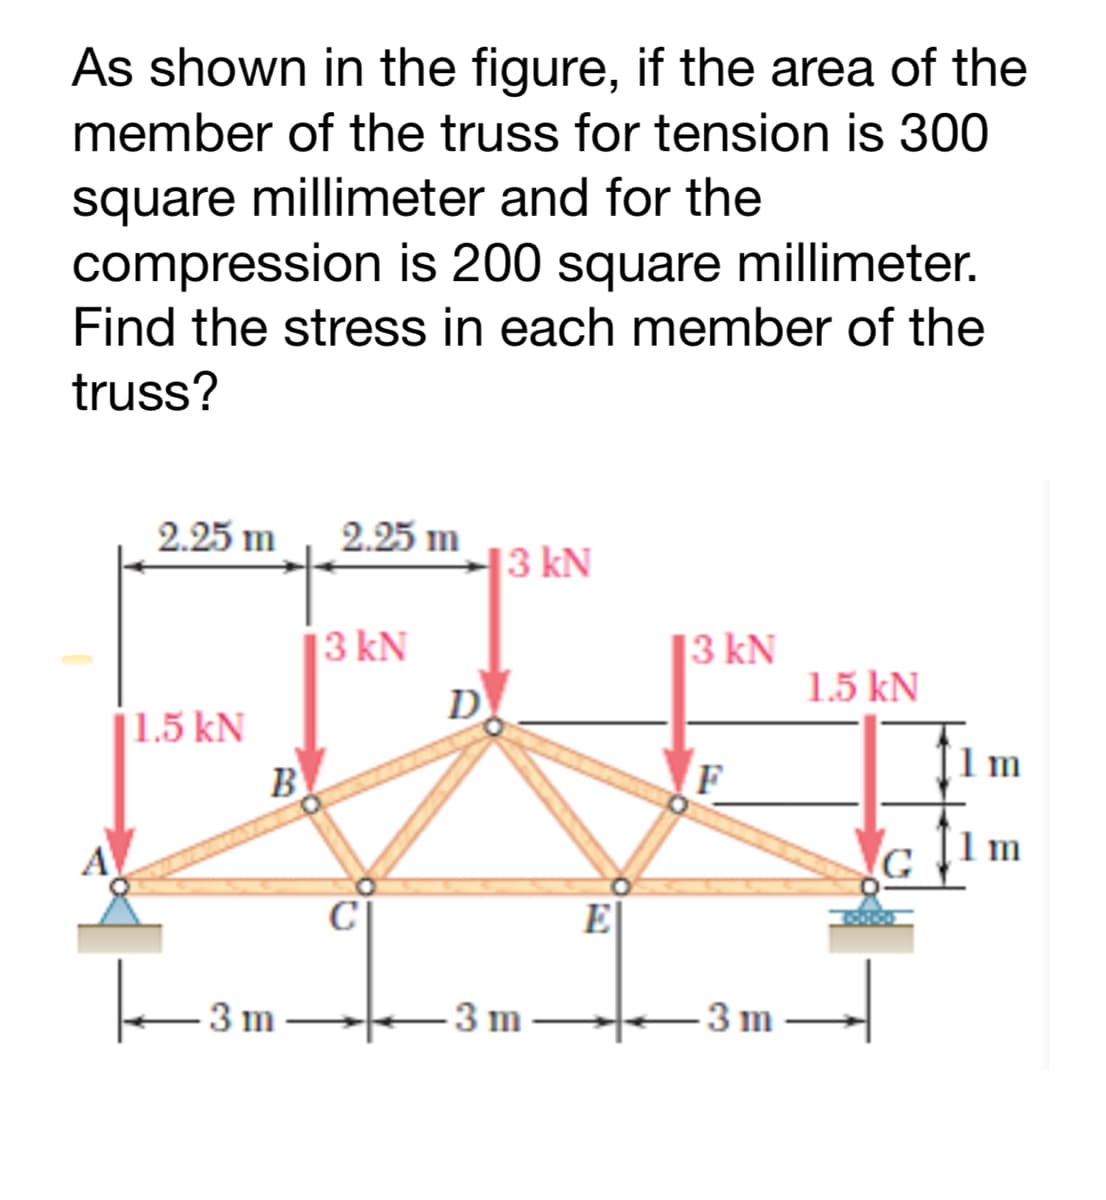 As shown in the figure, if the area of the
member of the truss for tension is 300
square millimeter and for the
compression is 200 square millimeter.
Find the stress in each member of the
truss?
2.25 m
2.25 m
13 kN
3 kN
1.5 kN
|3 kN
D
1.5 kN
B.
1 m
C
E
3 m
3 m
3 m
E E
